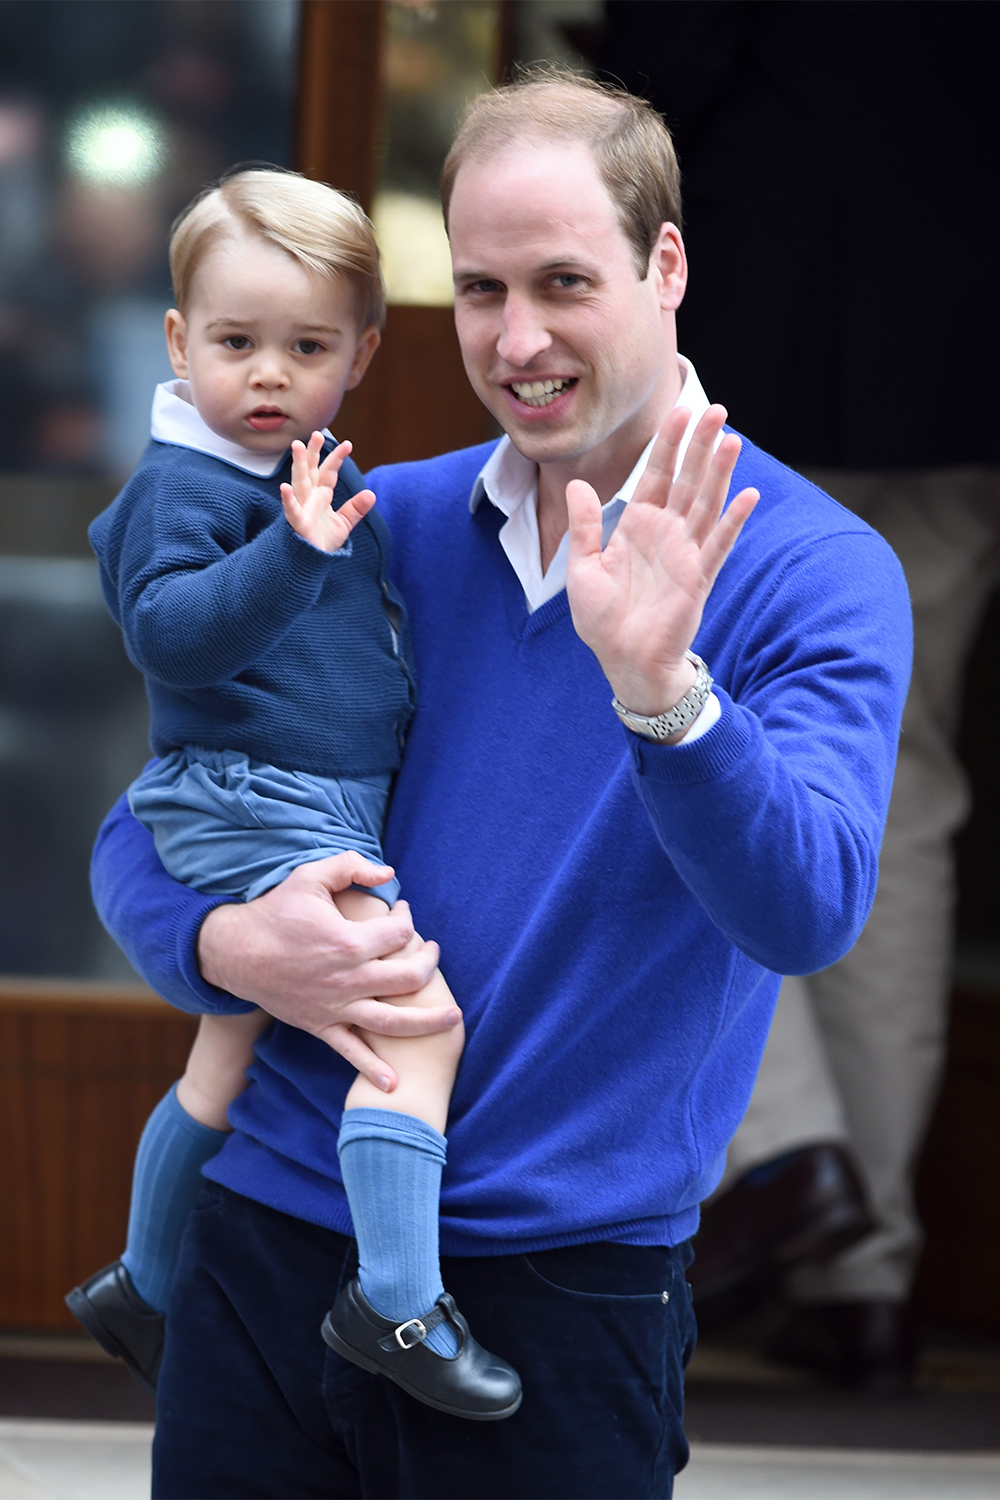 Prince George waves to the crowds as he arrives at the Lindo Wing at St. Mary's Hospital with his father Prince William to meet his new sister Princess Charlotte on May 2, 2015.